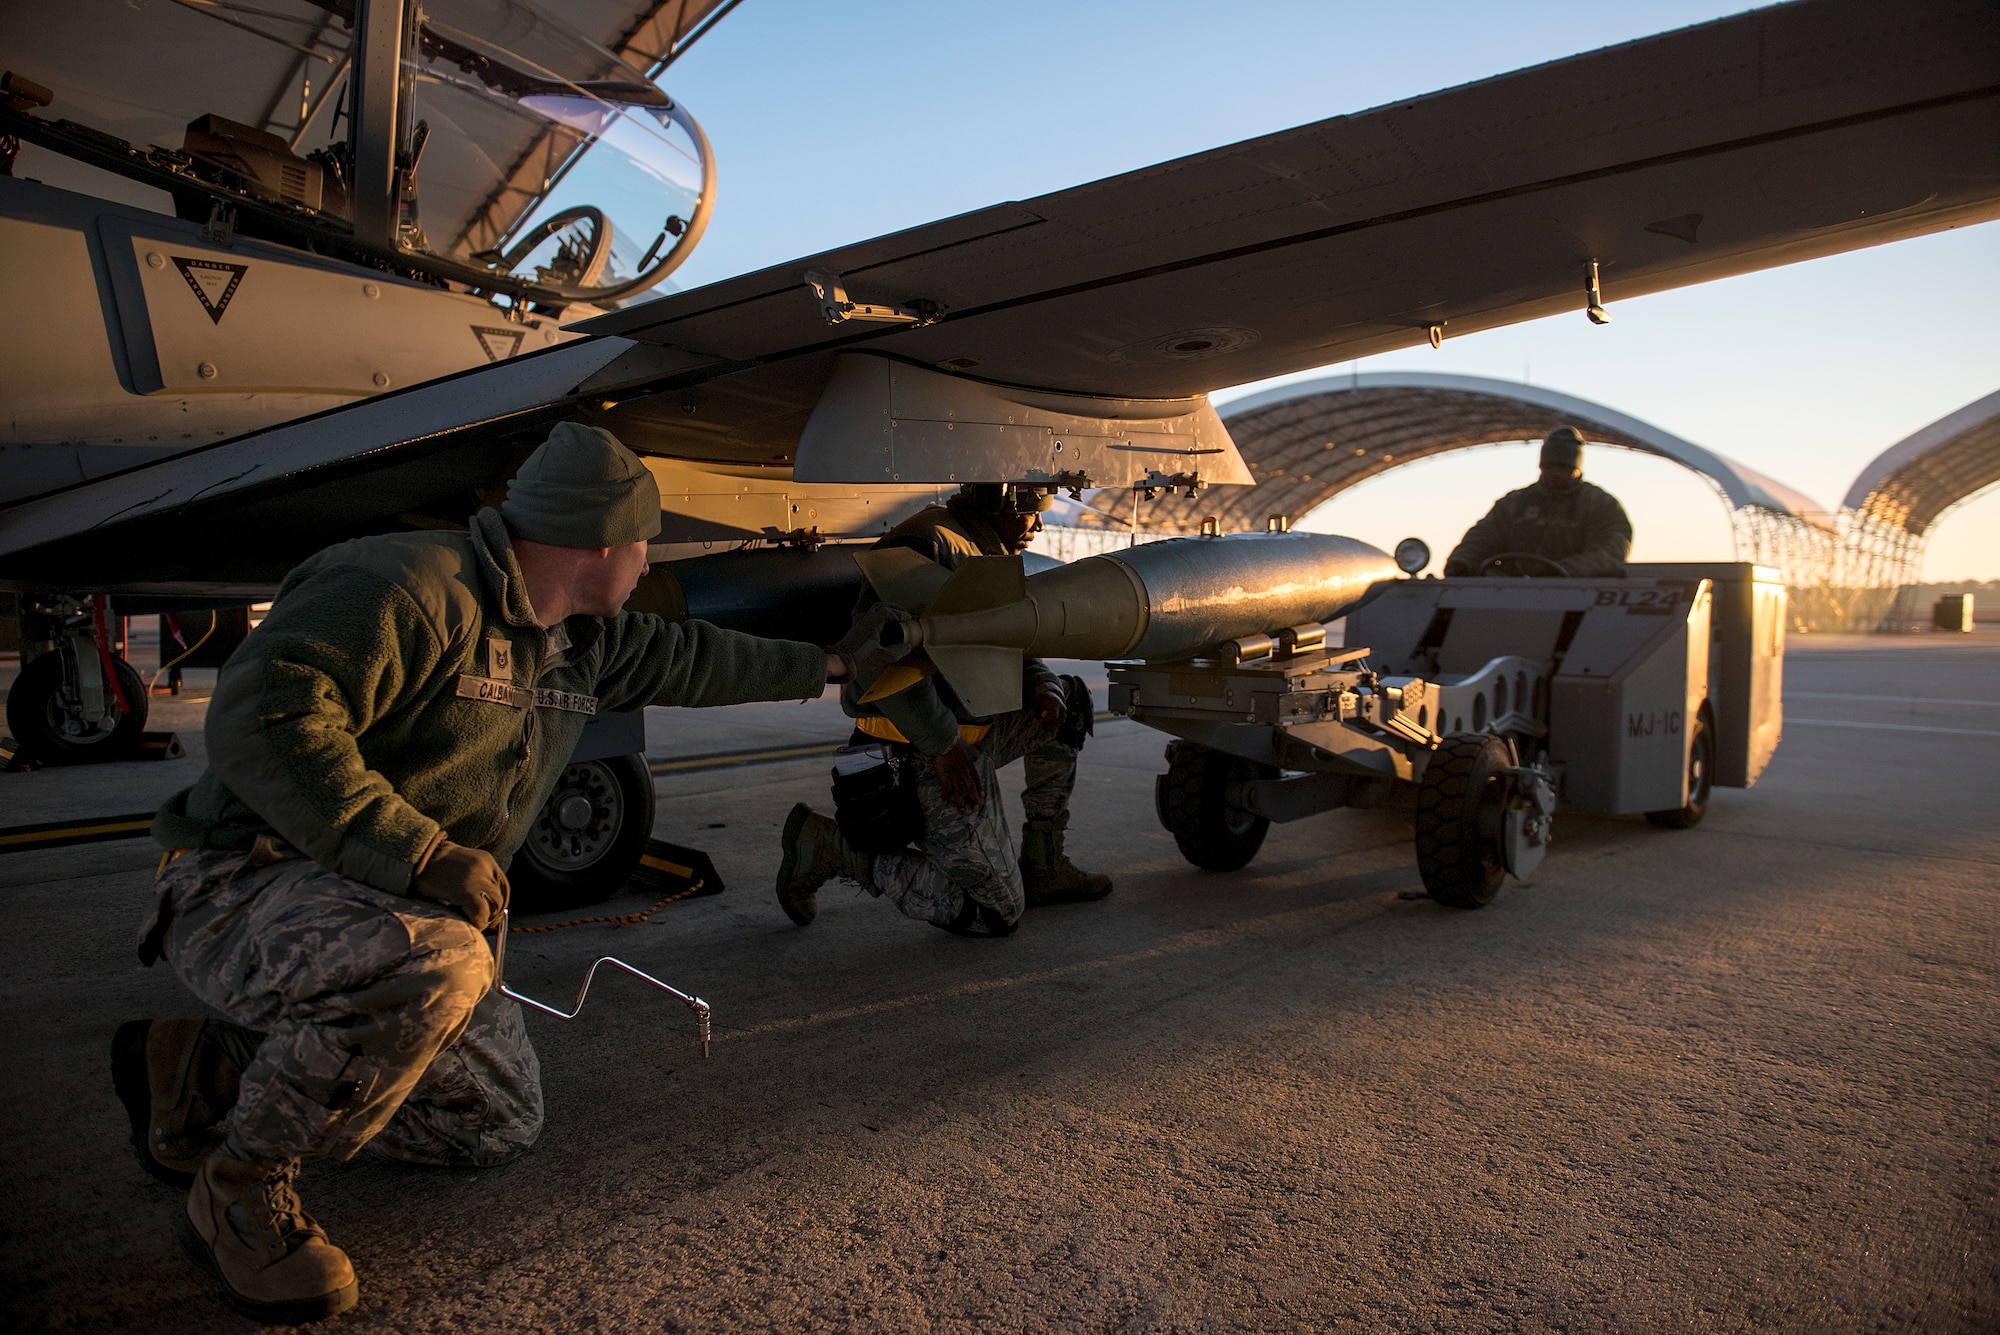 U.S. Air Force weapons advisors load an inert 500 pound training bomb on to an A-29 Super Tucano at Moody Air Force Base, Georgia. (U.S. Air Force photo/Master Sgt. Jeffrey Allen)